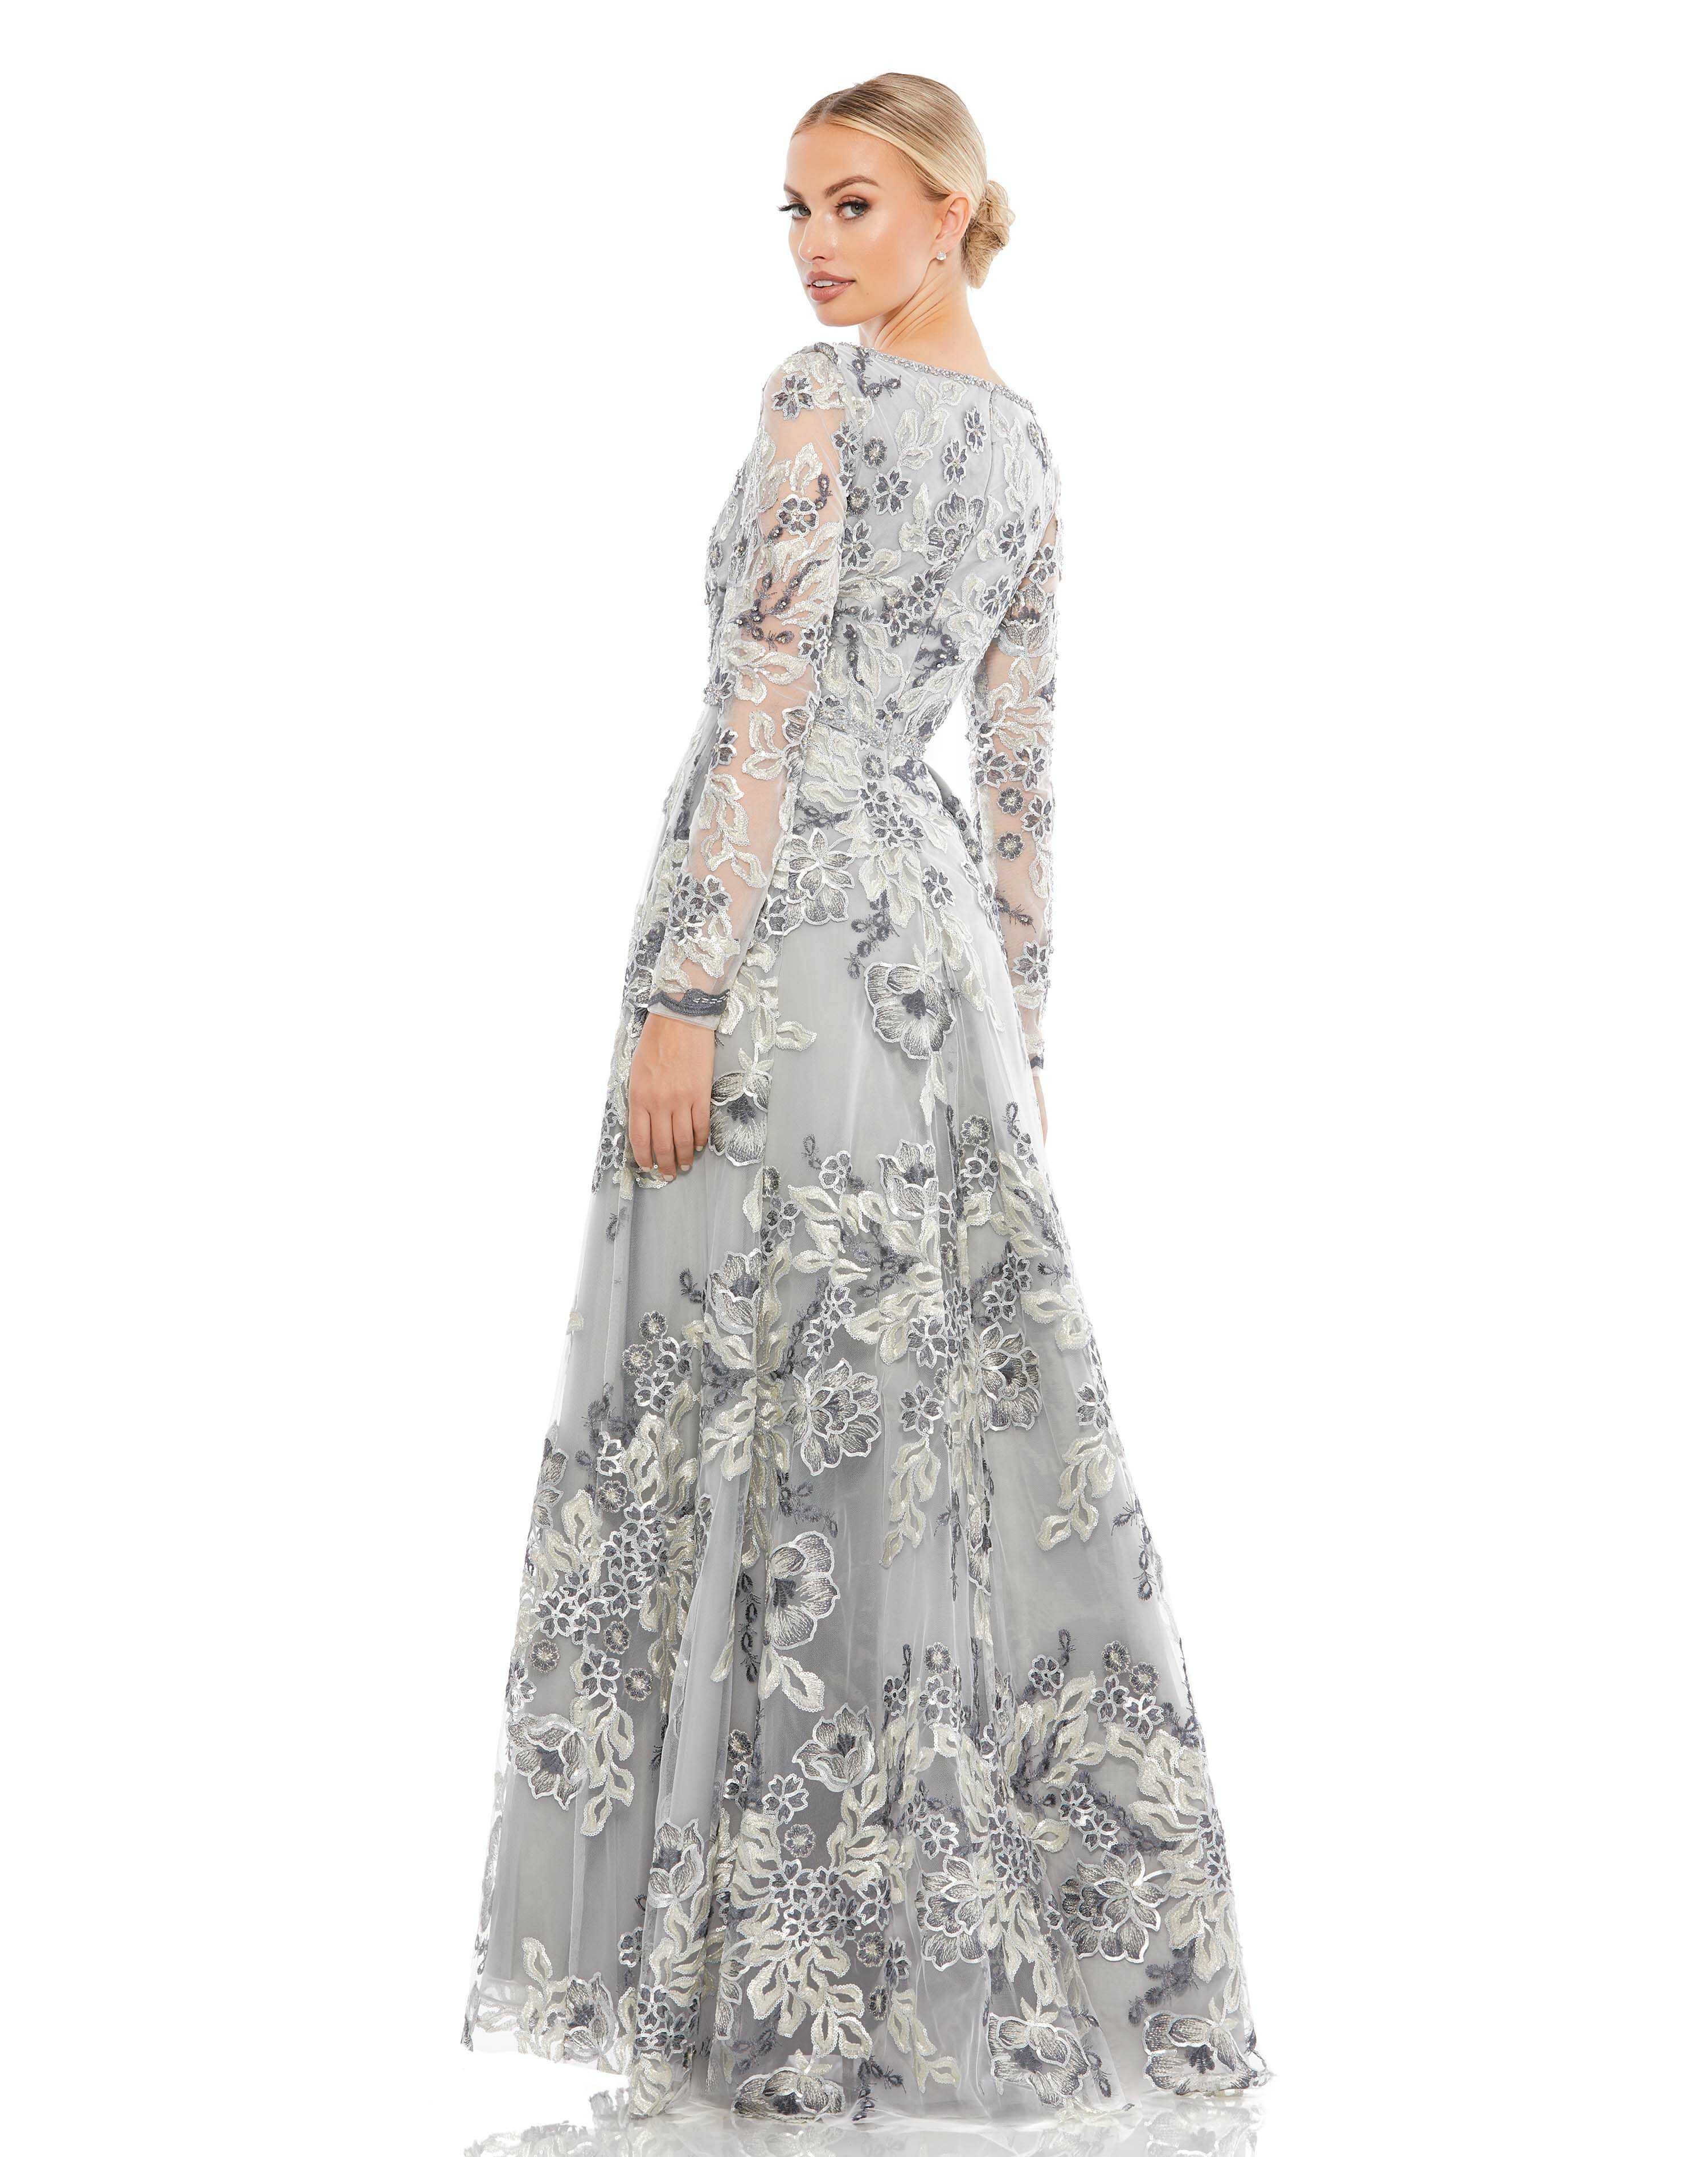 Floral Embellished Illusion Sleeve A-Line Gown